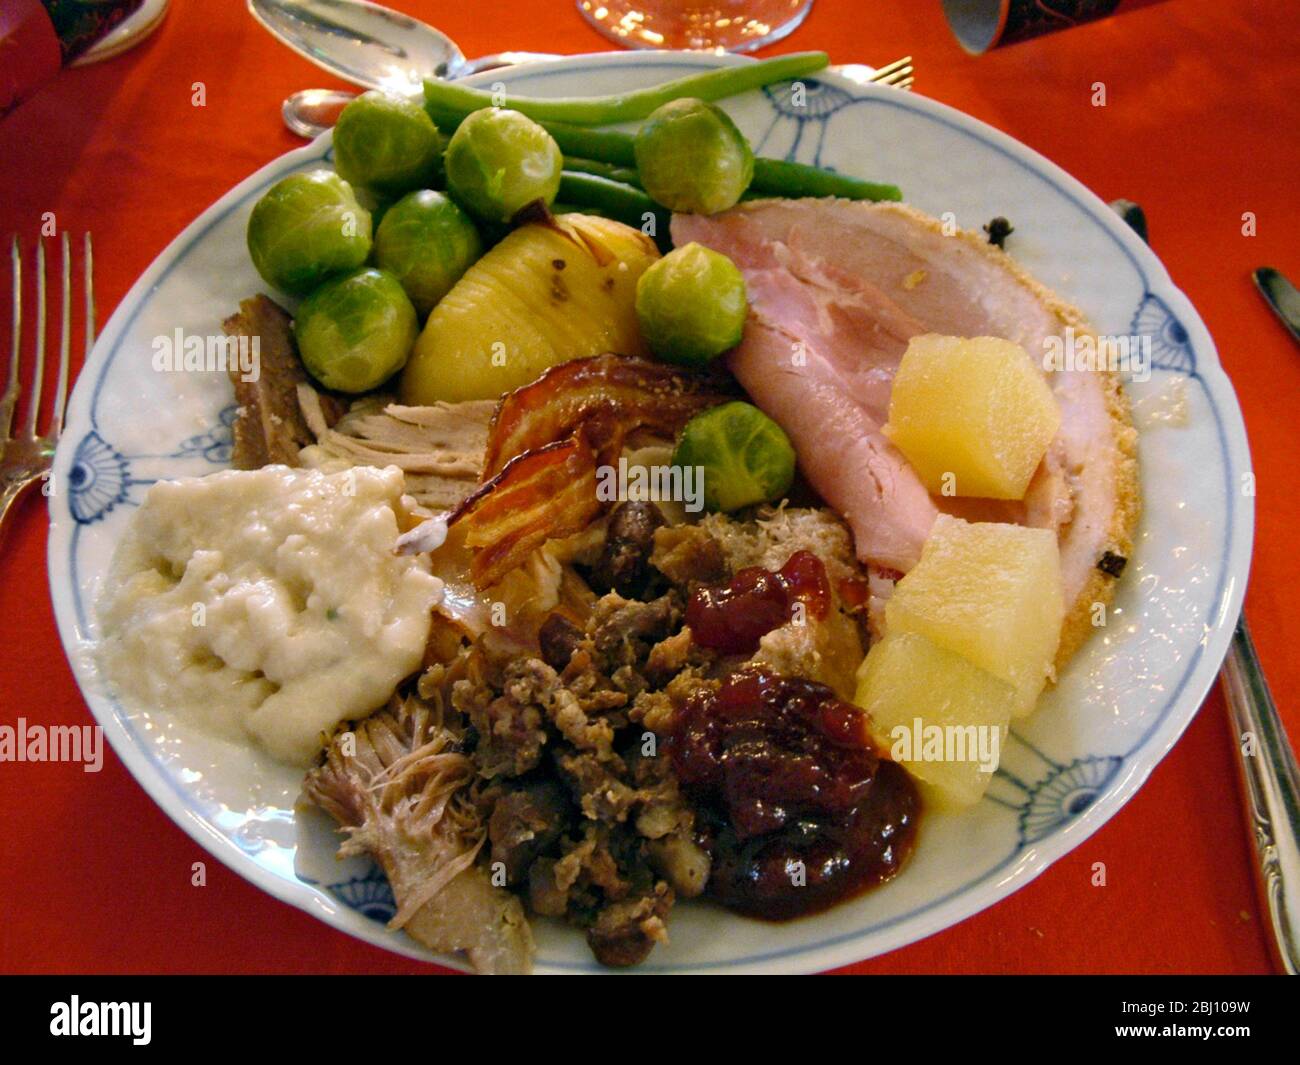 Full Christmas dinner with turkey, ham , bread sauce, stuffing, brussels sprouts, sausagemeat, pineapple relish, roast potato, cranberry sauce on dani Stock Photo